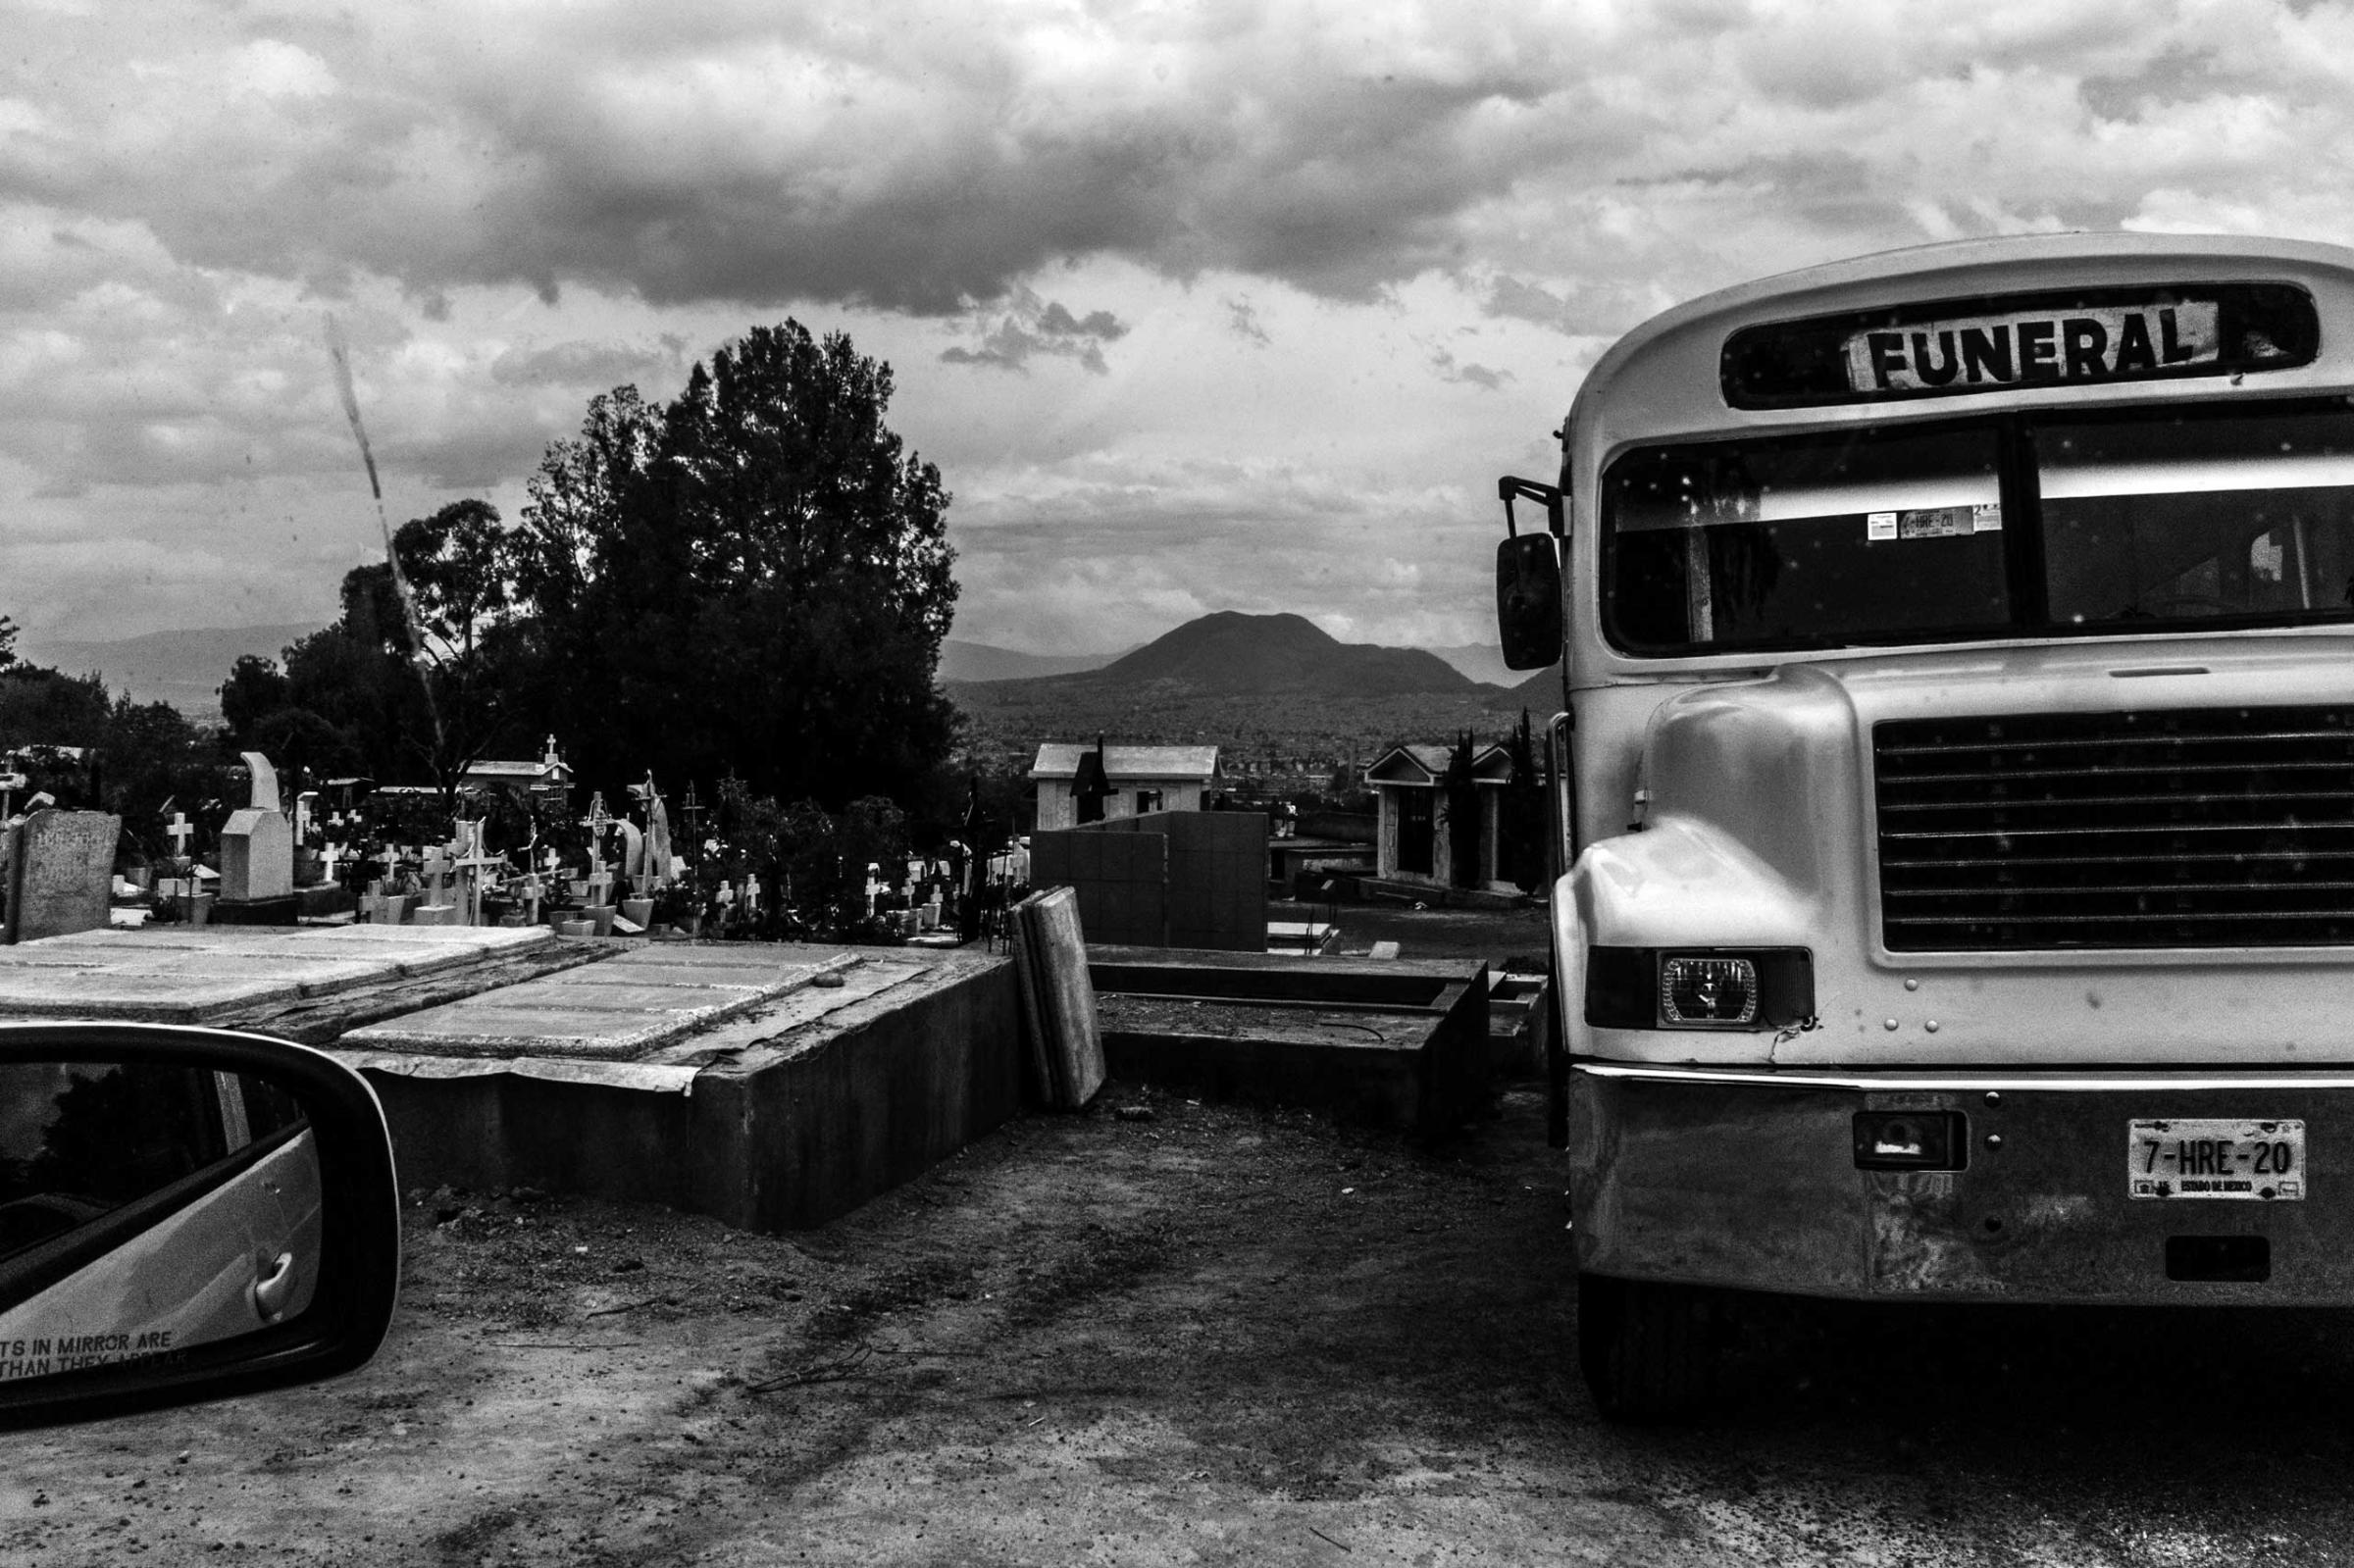 A funeral bus is seeng at the San Nicolas Tolentino cementary. For practical reasonsm Families and friends ussualy rent a bus to get to the funerals.